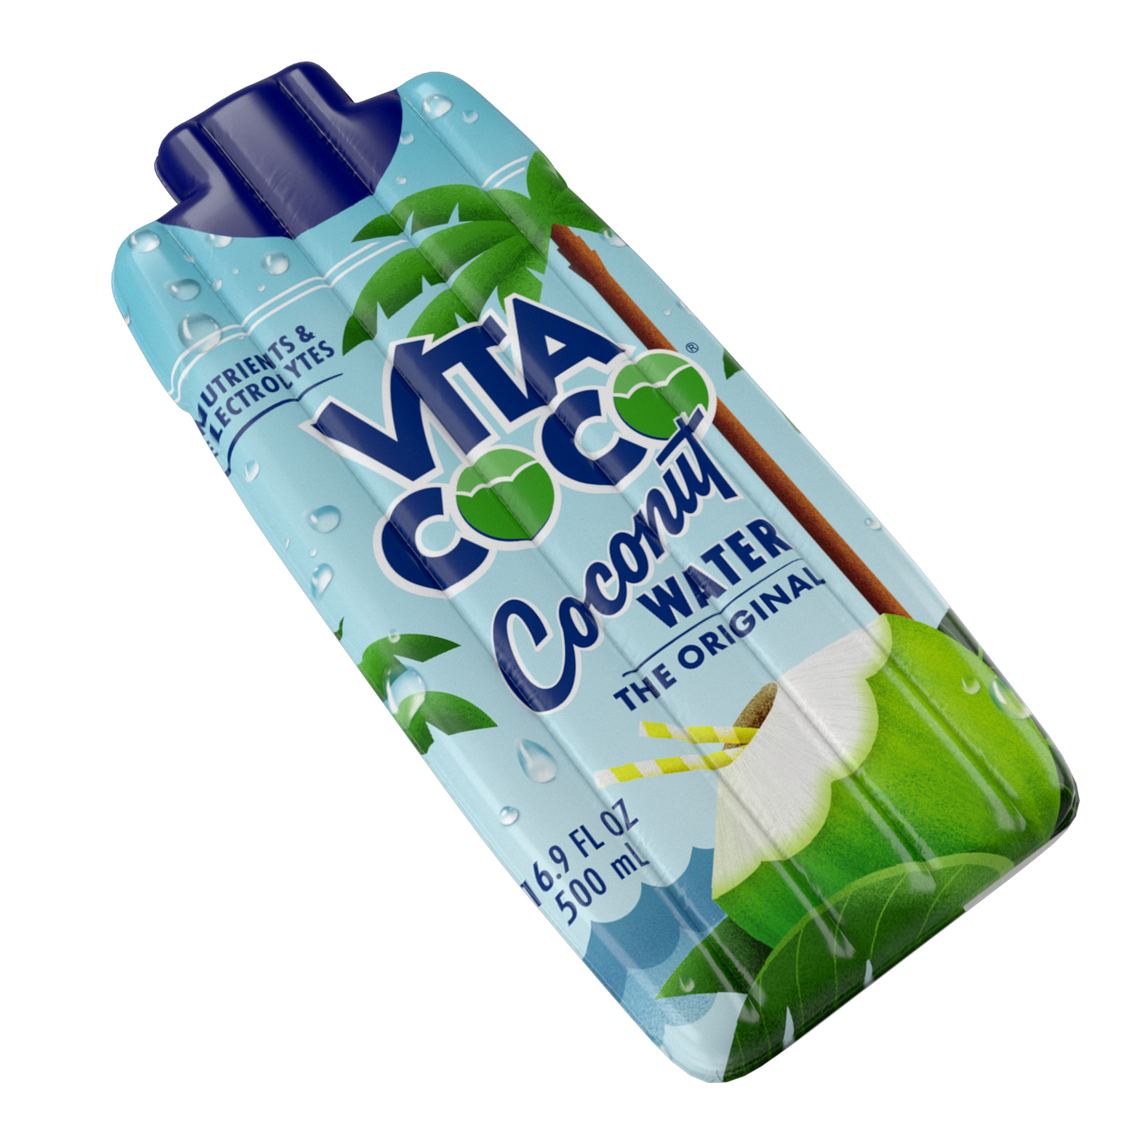 The Reversible Coconut Water Floatie by Vita Coco is a refreshing beverage packed with electrolytes and nutrients. It is made from natural coconut water and has a satisfying taste. The Reversible Coconut Water Floatie by Vita Coco comes in various dimensions, including width.